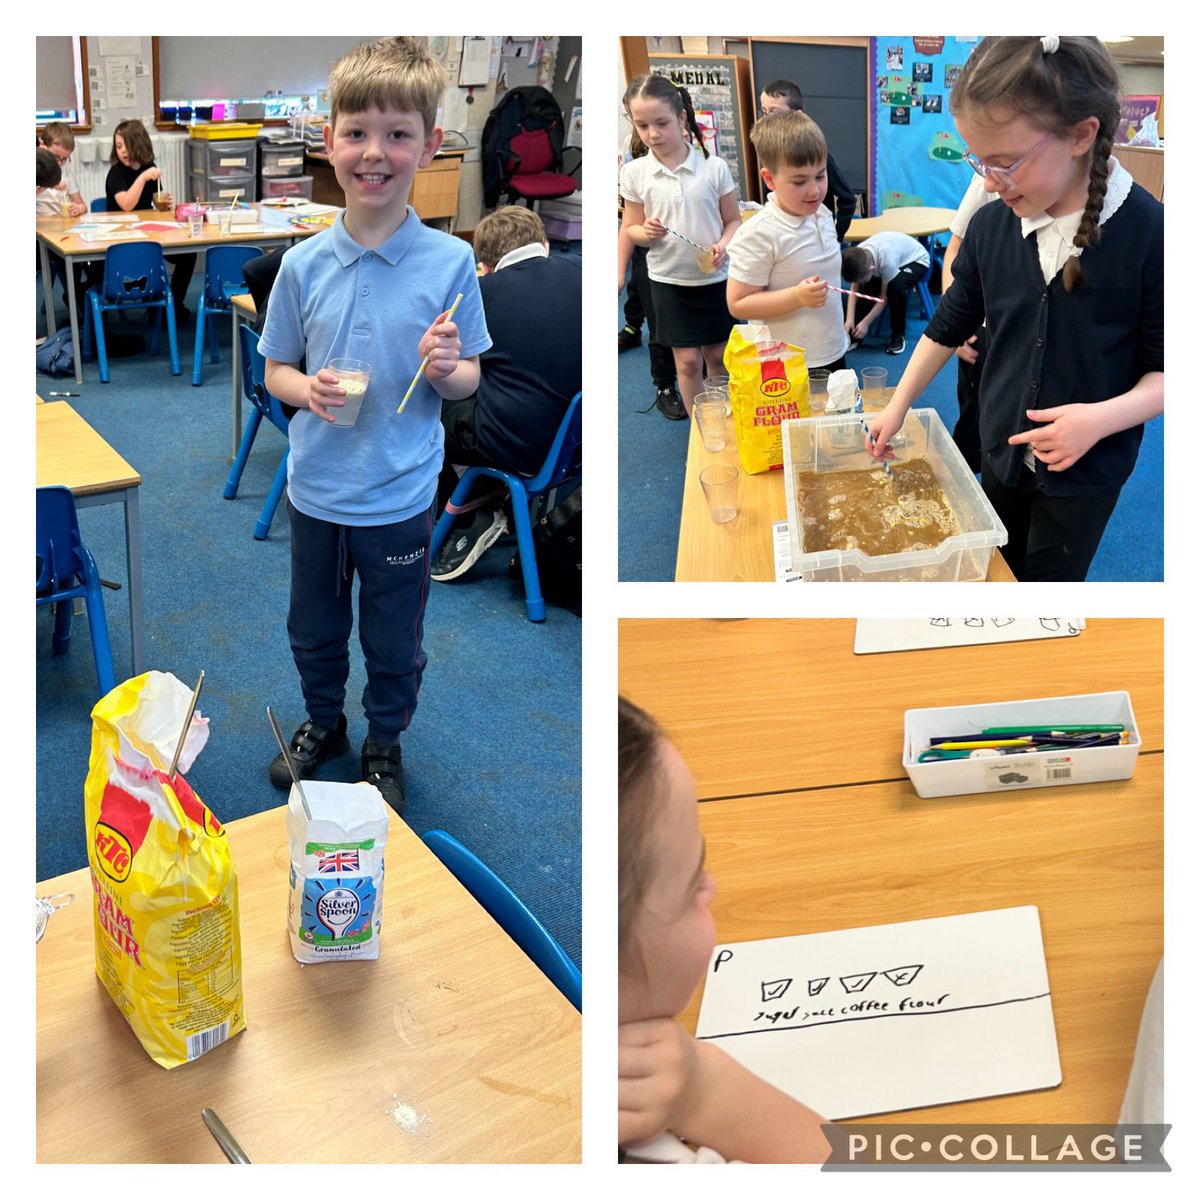 P3/4 undertook a science experiment… predicting what would float and what would not. They then checked their predictions! #science #experiment #predict